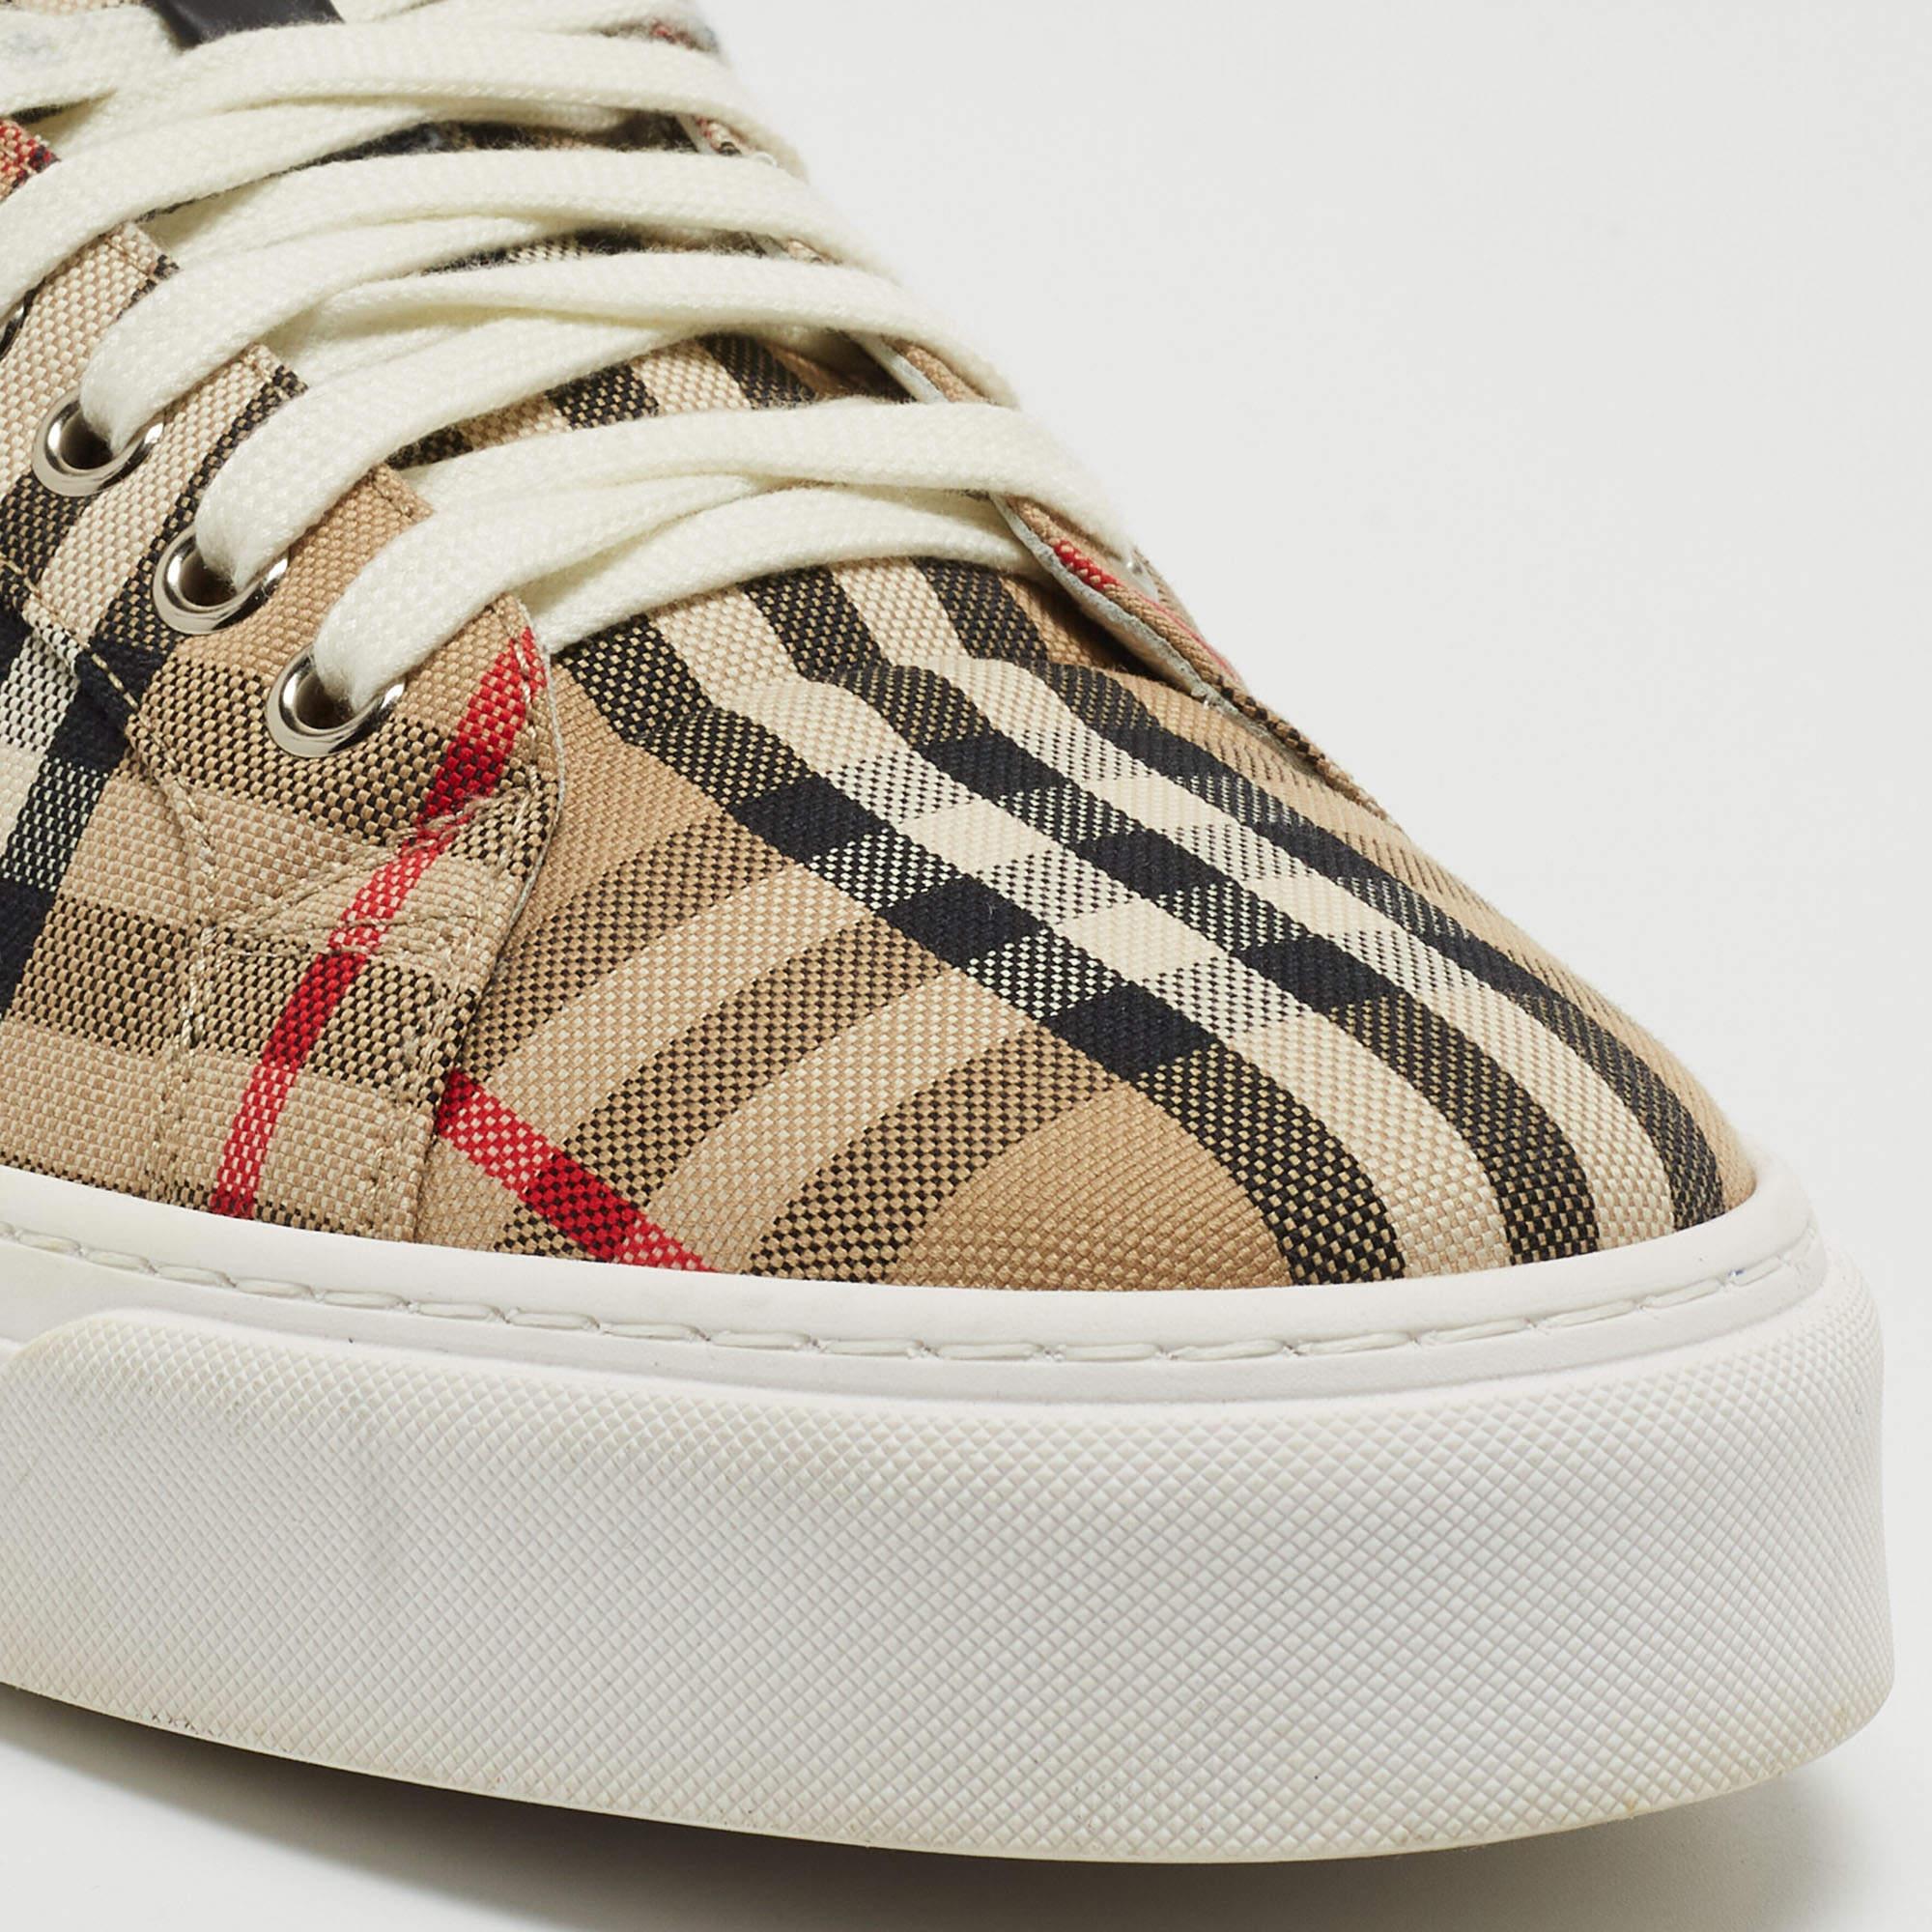 Burberry Beige Check Canvas Low Top Sneakers Size 43 3